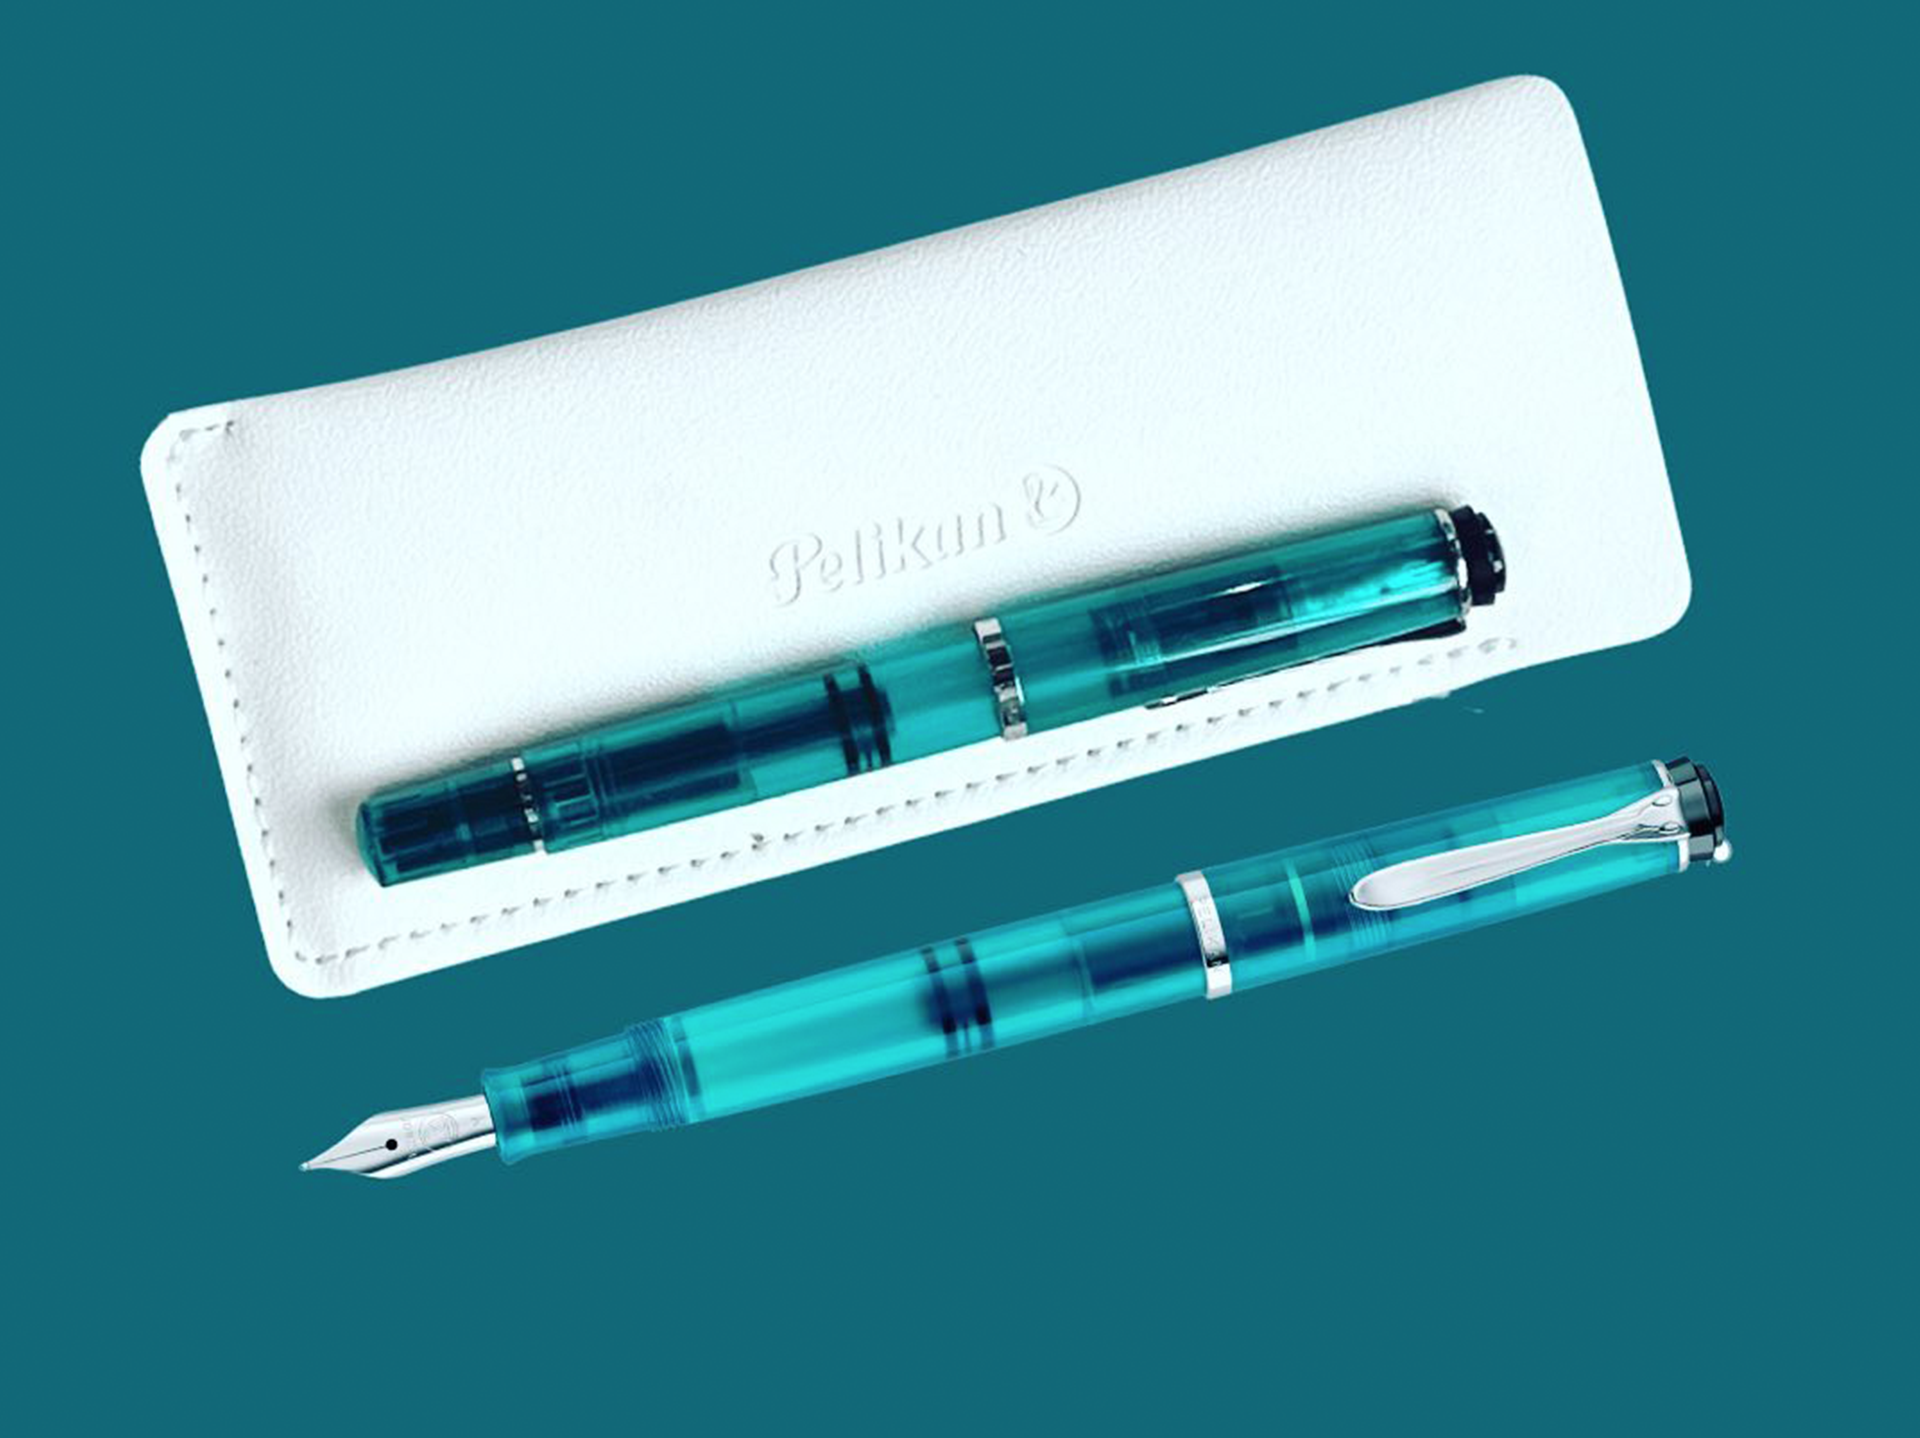 The Best Fountain Pen for You